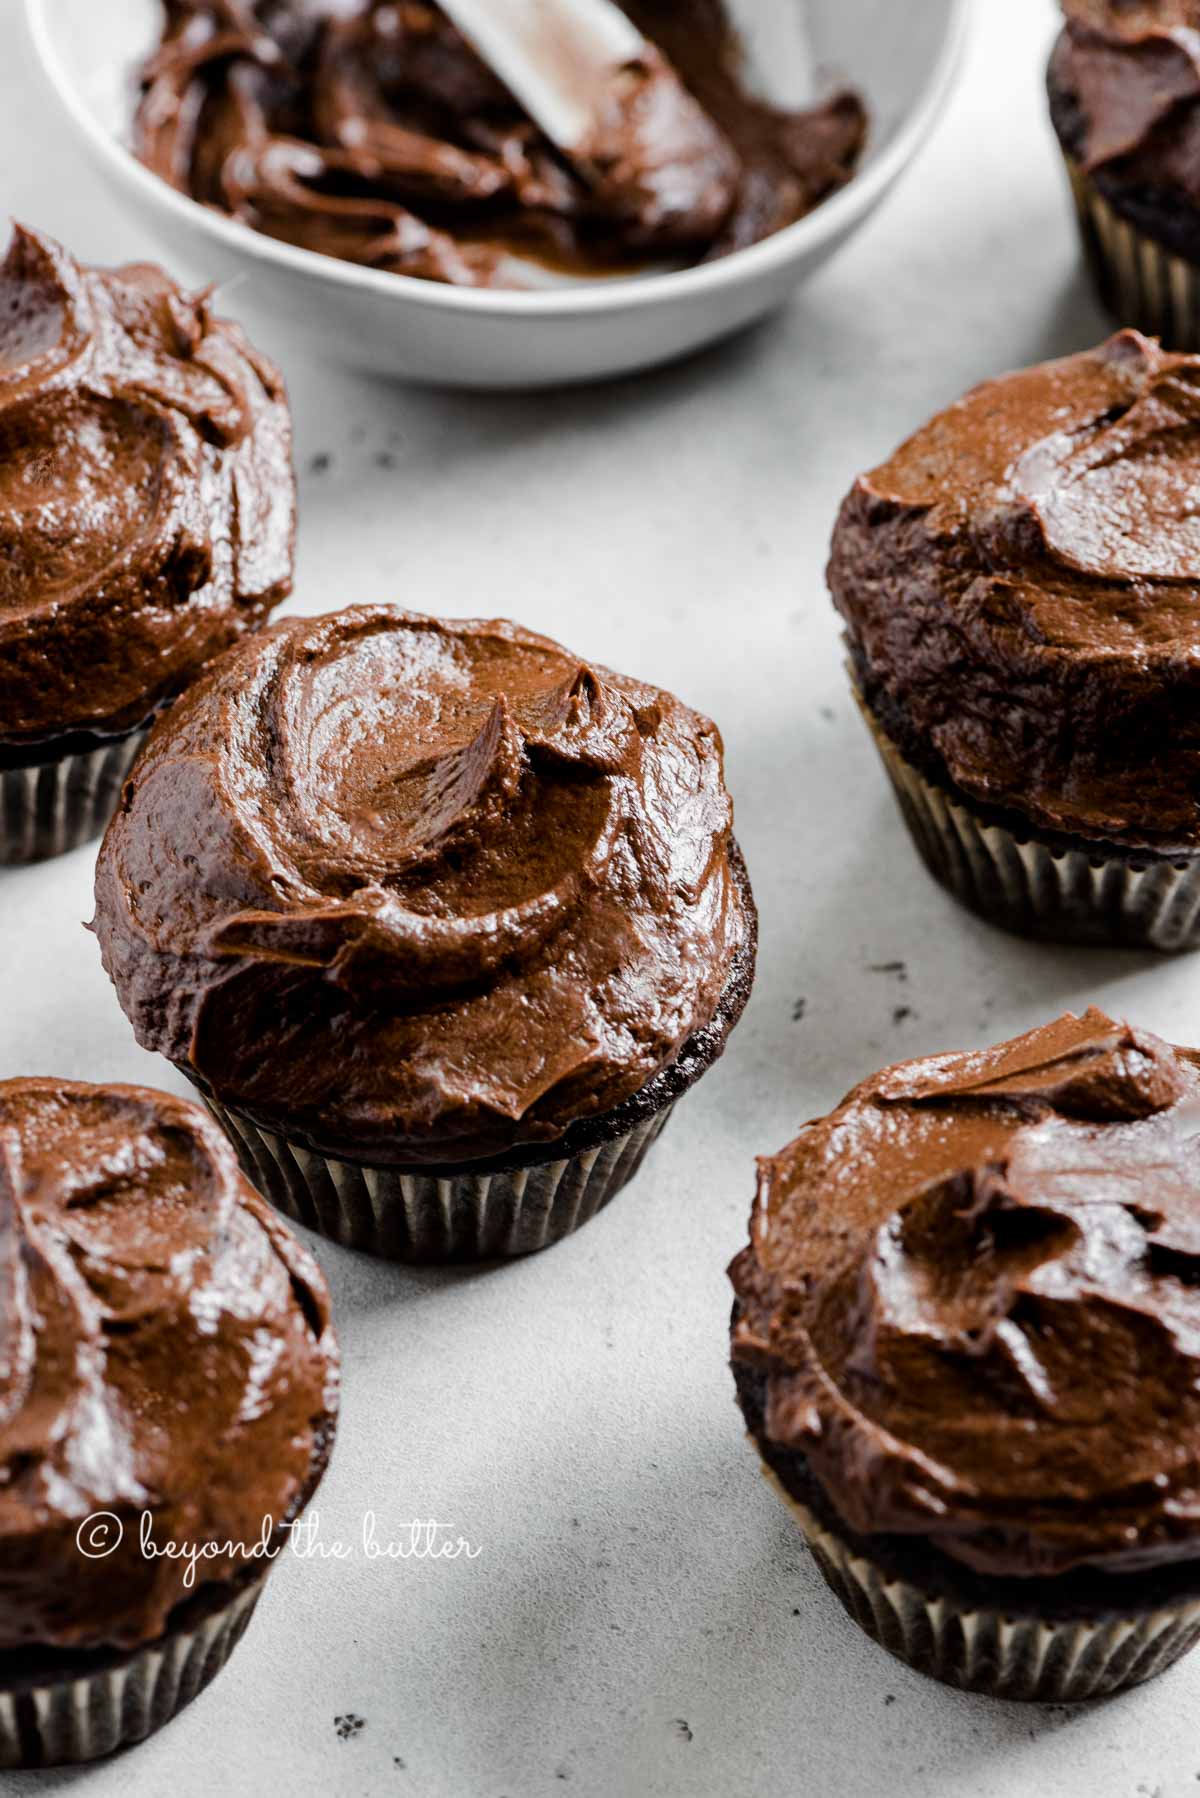 Angled image of small batch chocoalte cupcakes | All images © Beyond the Butter™